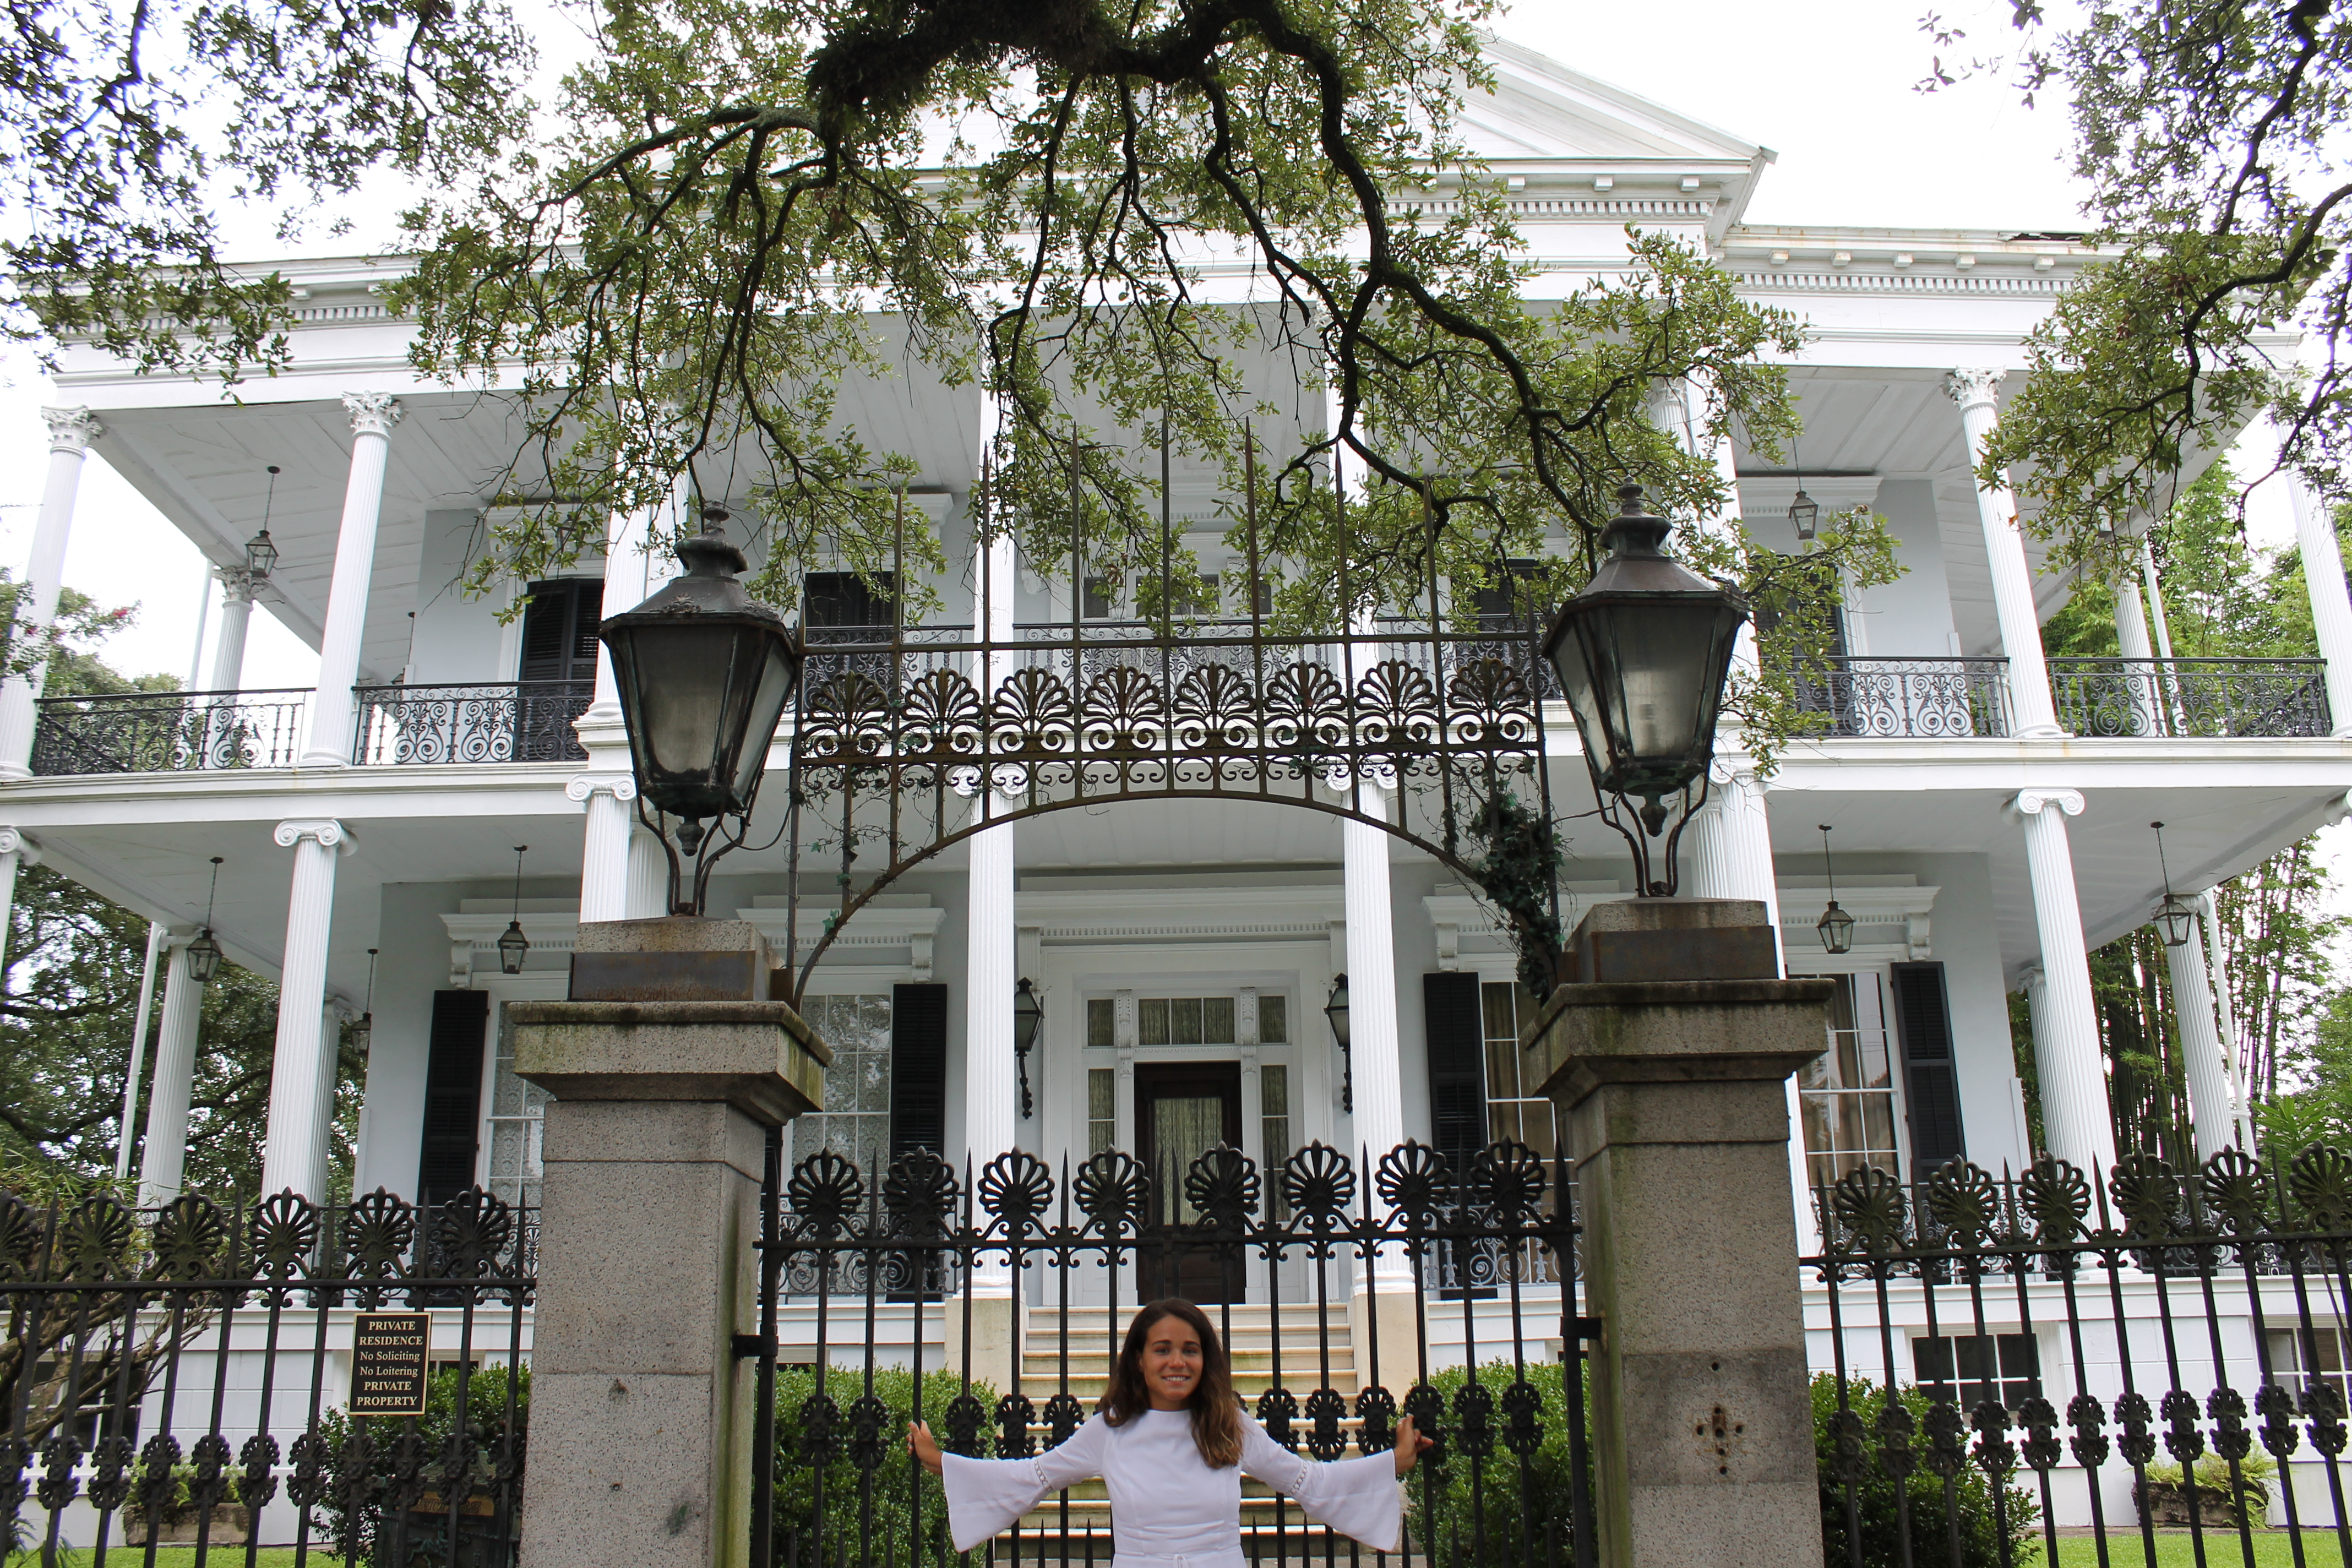 Dani poses in front of the mansion featured in the television series American Horror Story.